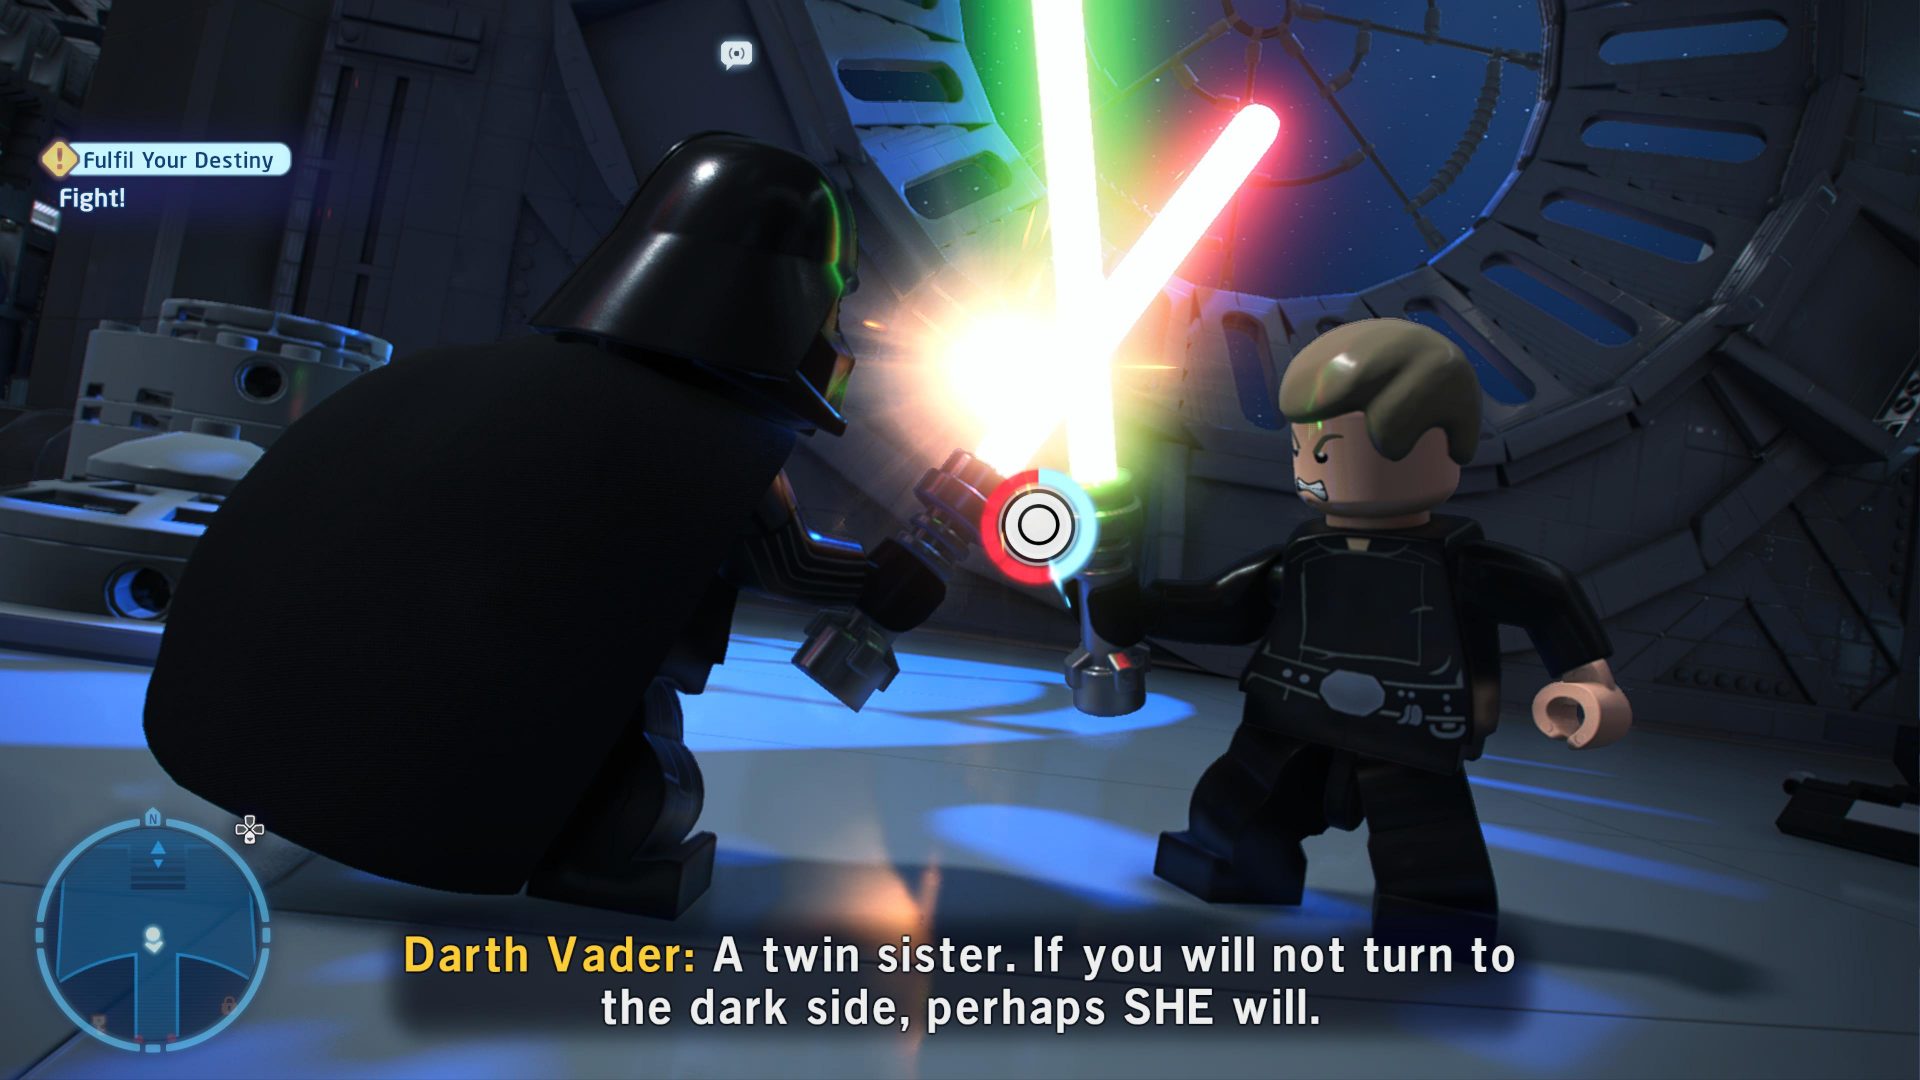 LEGO Star Wars: The Skywalker Saga reviews are in - What are the